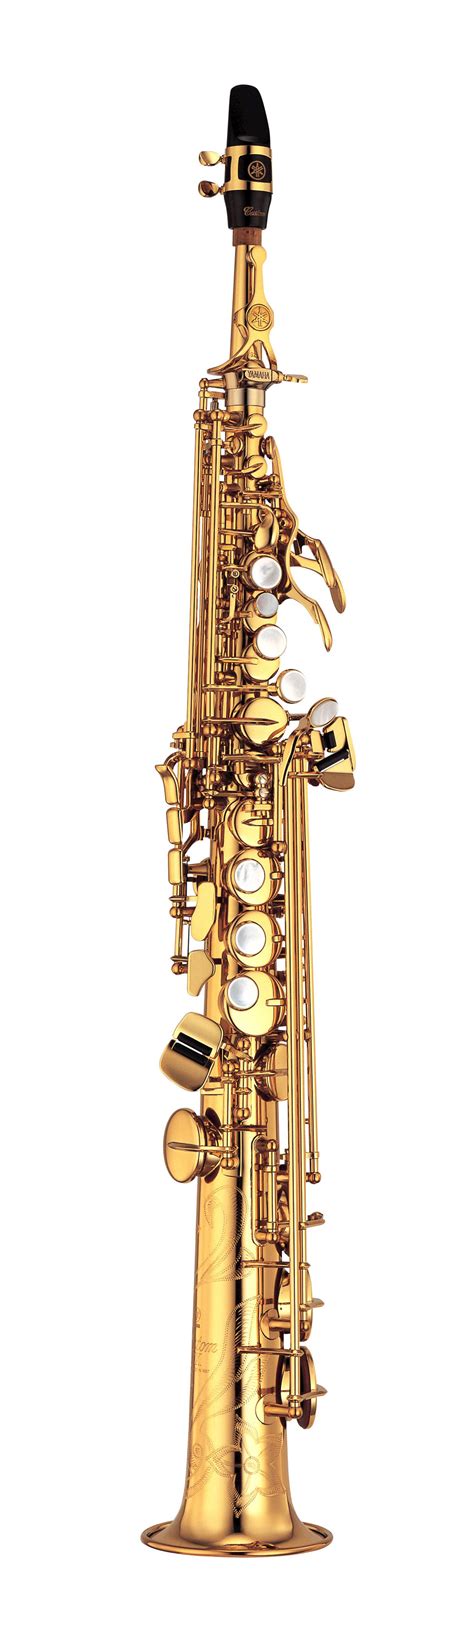 Yss 875ex 875exhg Overview Saxophones Brass And Woodwinds Musical